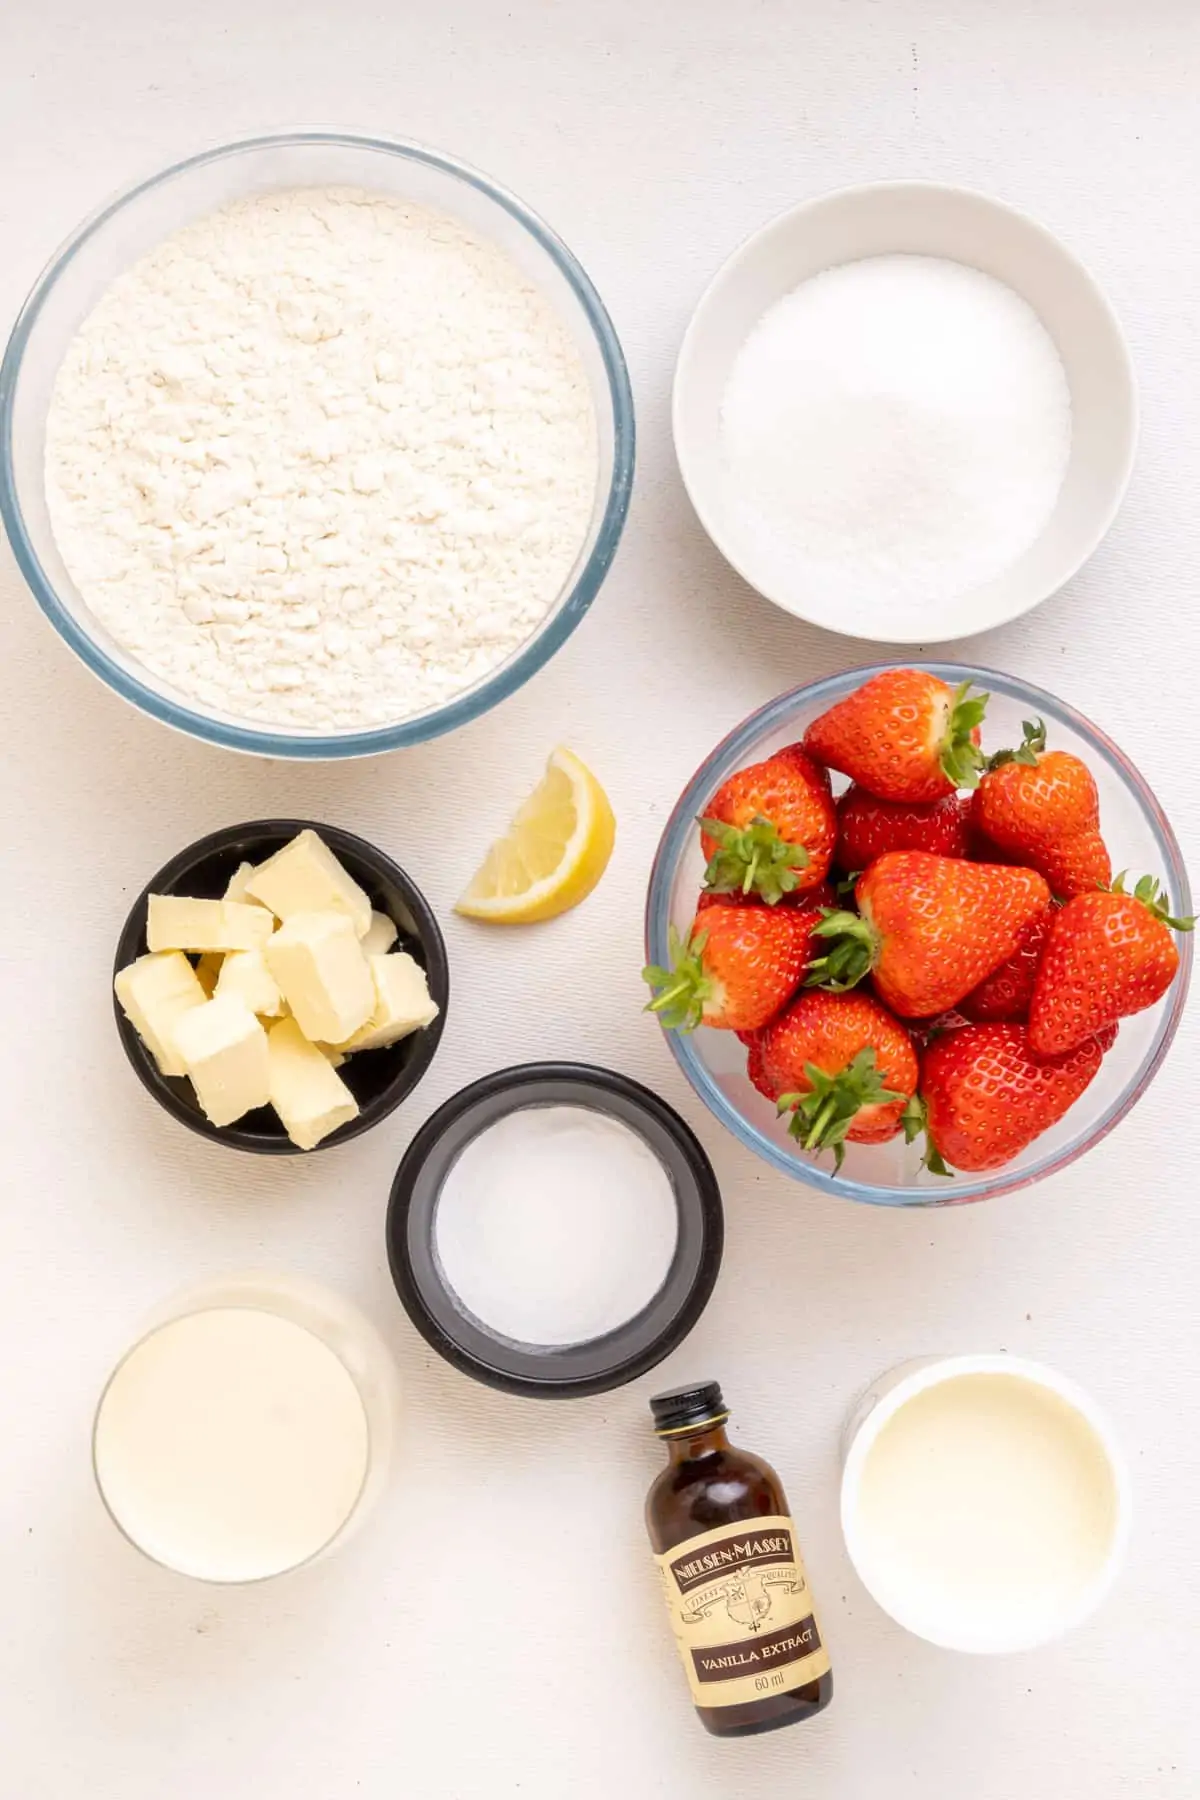 The ingredients for vegan strawberry shortcake: Strawberries, white flour, sugar, baking powder, cubes of vegan butter, soy milk, vegan whipping cream, vanilla extract and a small piece of lemon.